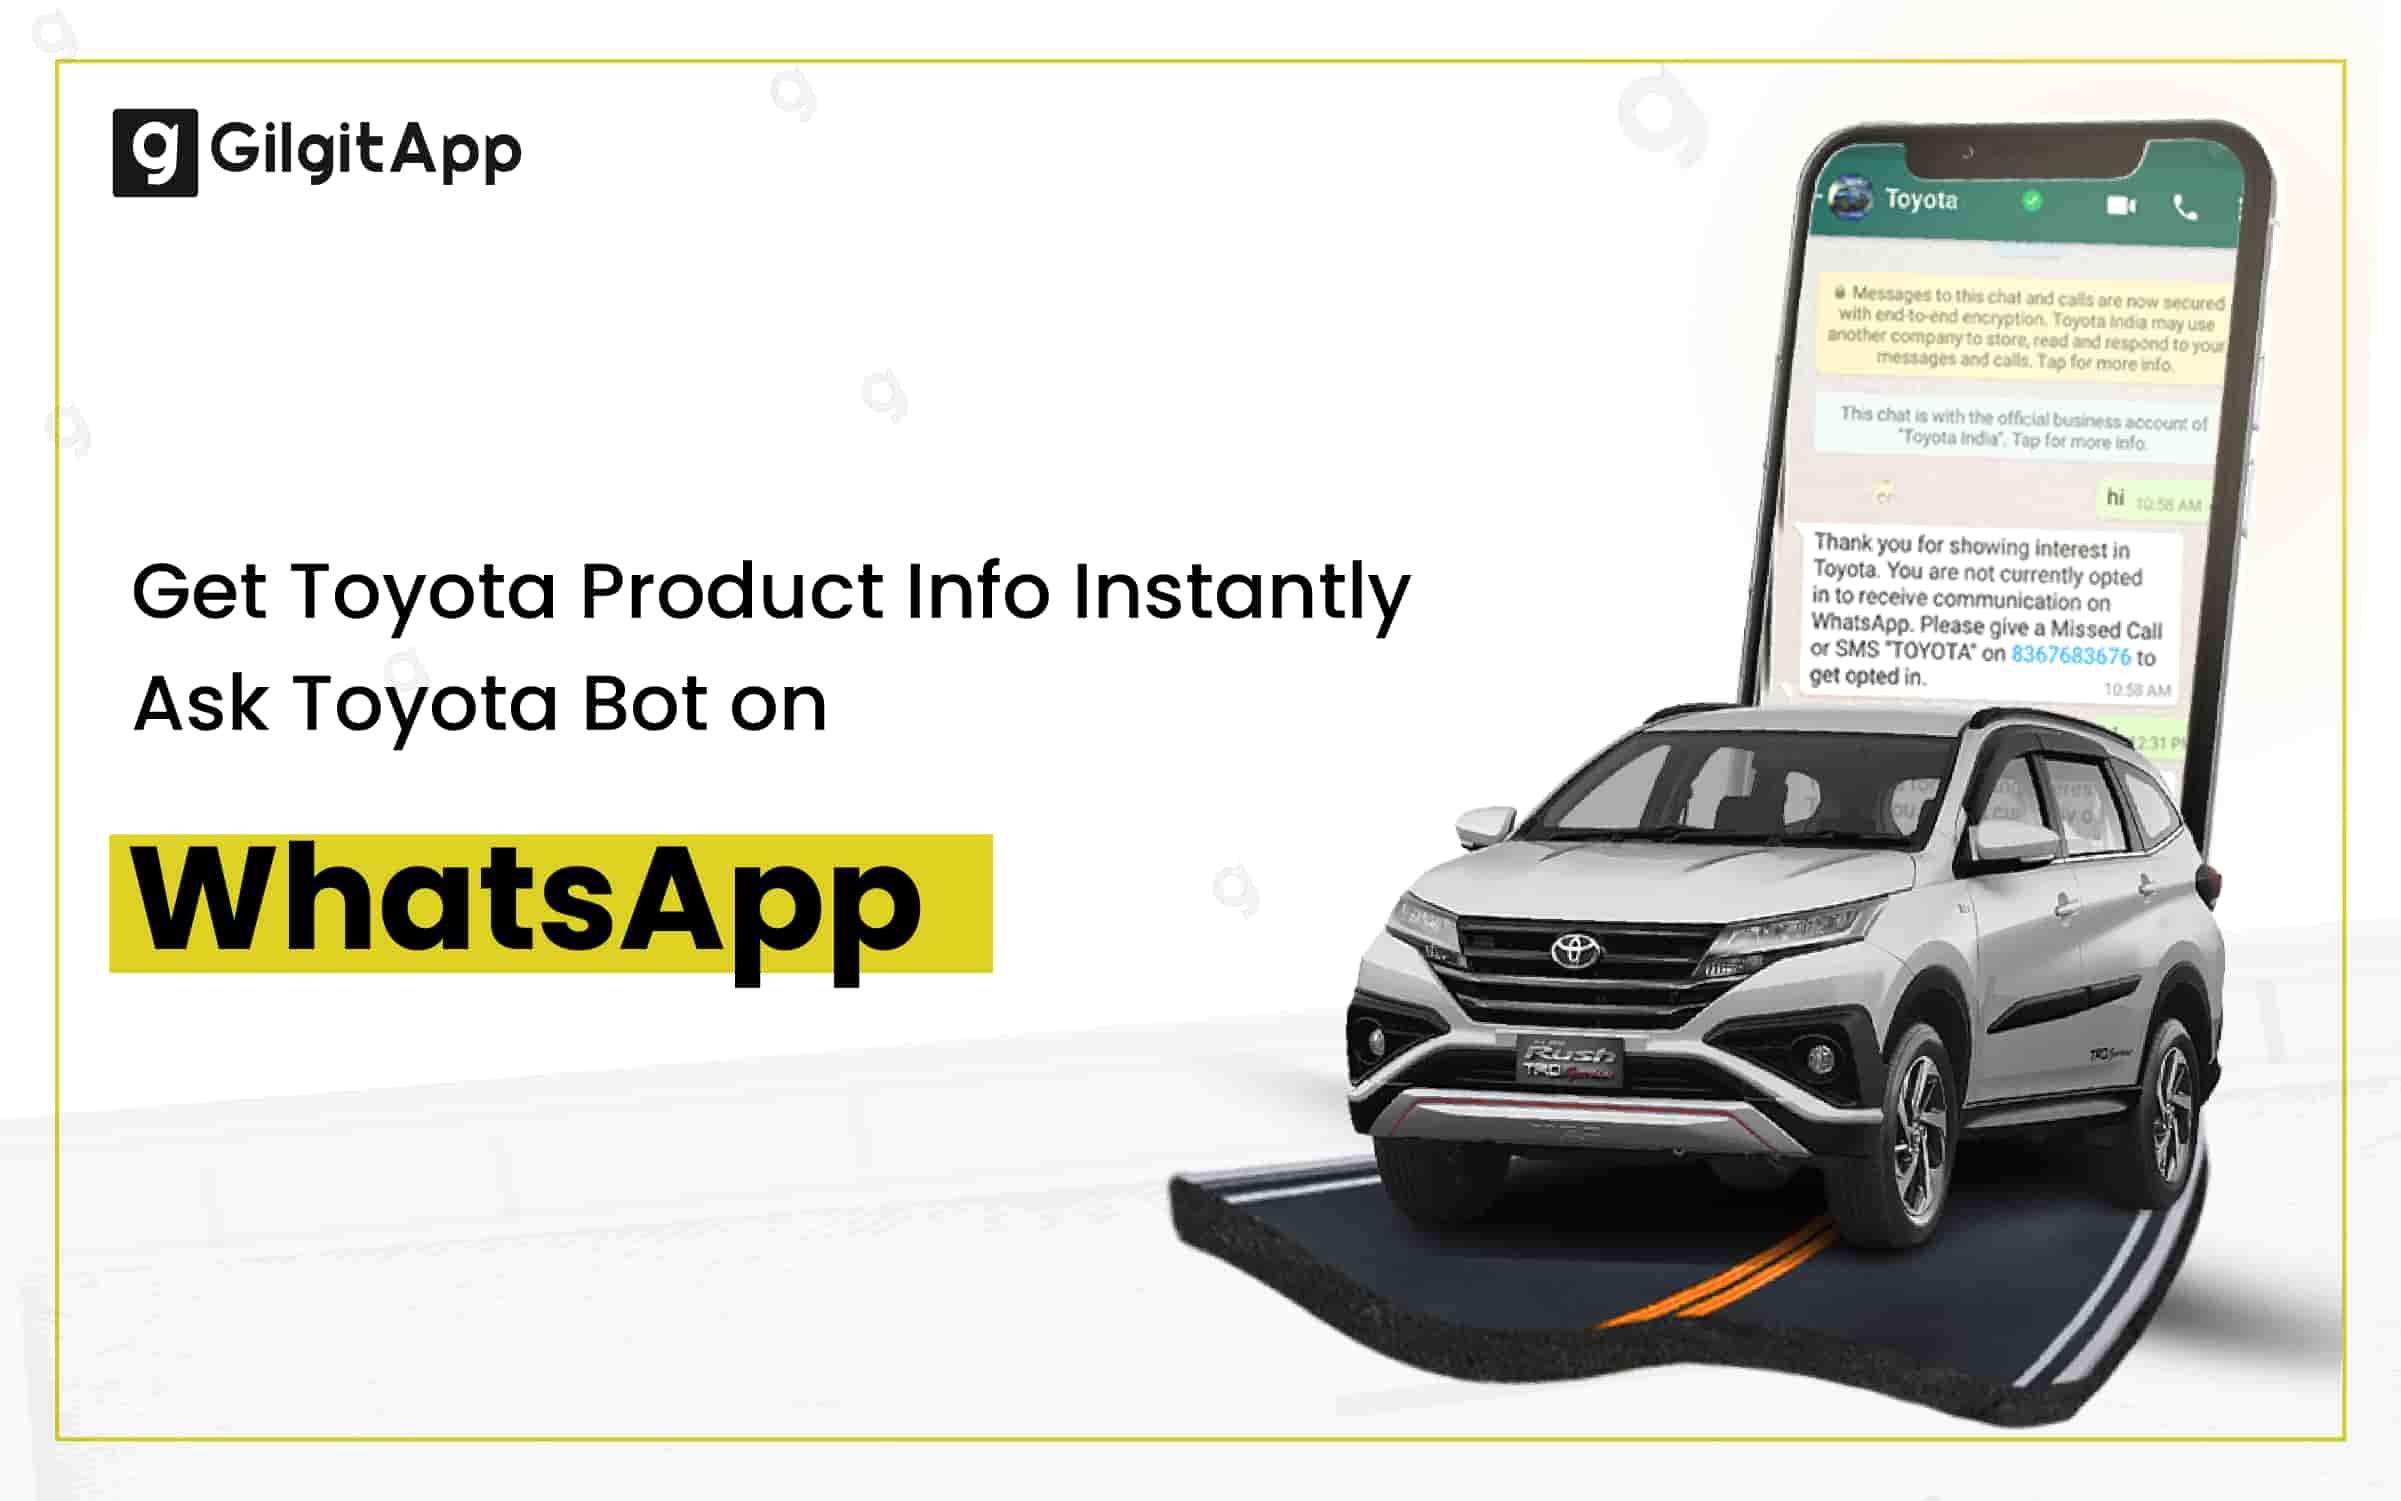 Get Toyota Product Info Instantly - Ask Toyota Bot on WhatsApp